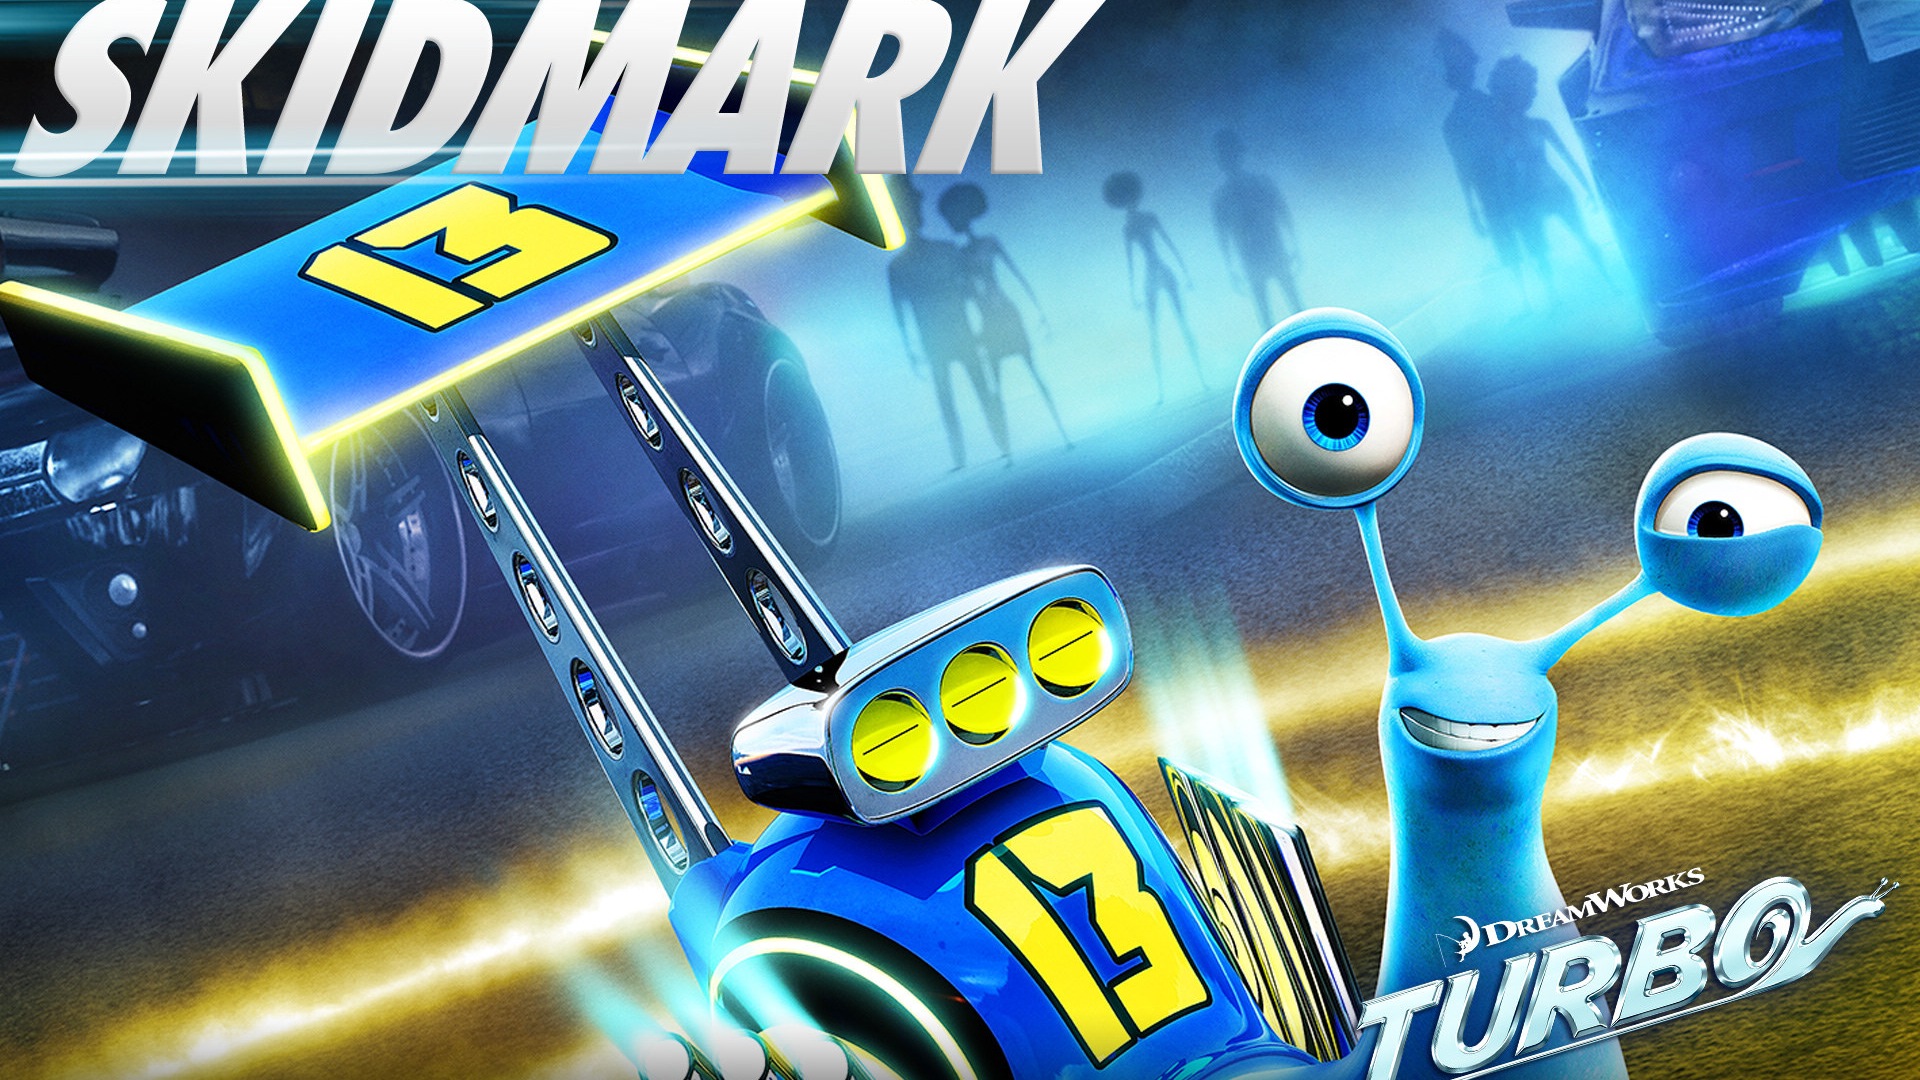 Turbo 3D movie HD wallpapers #11 - 1920x1080